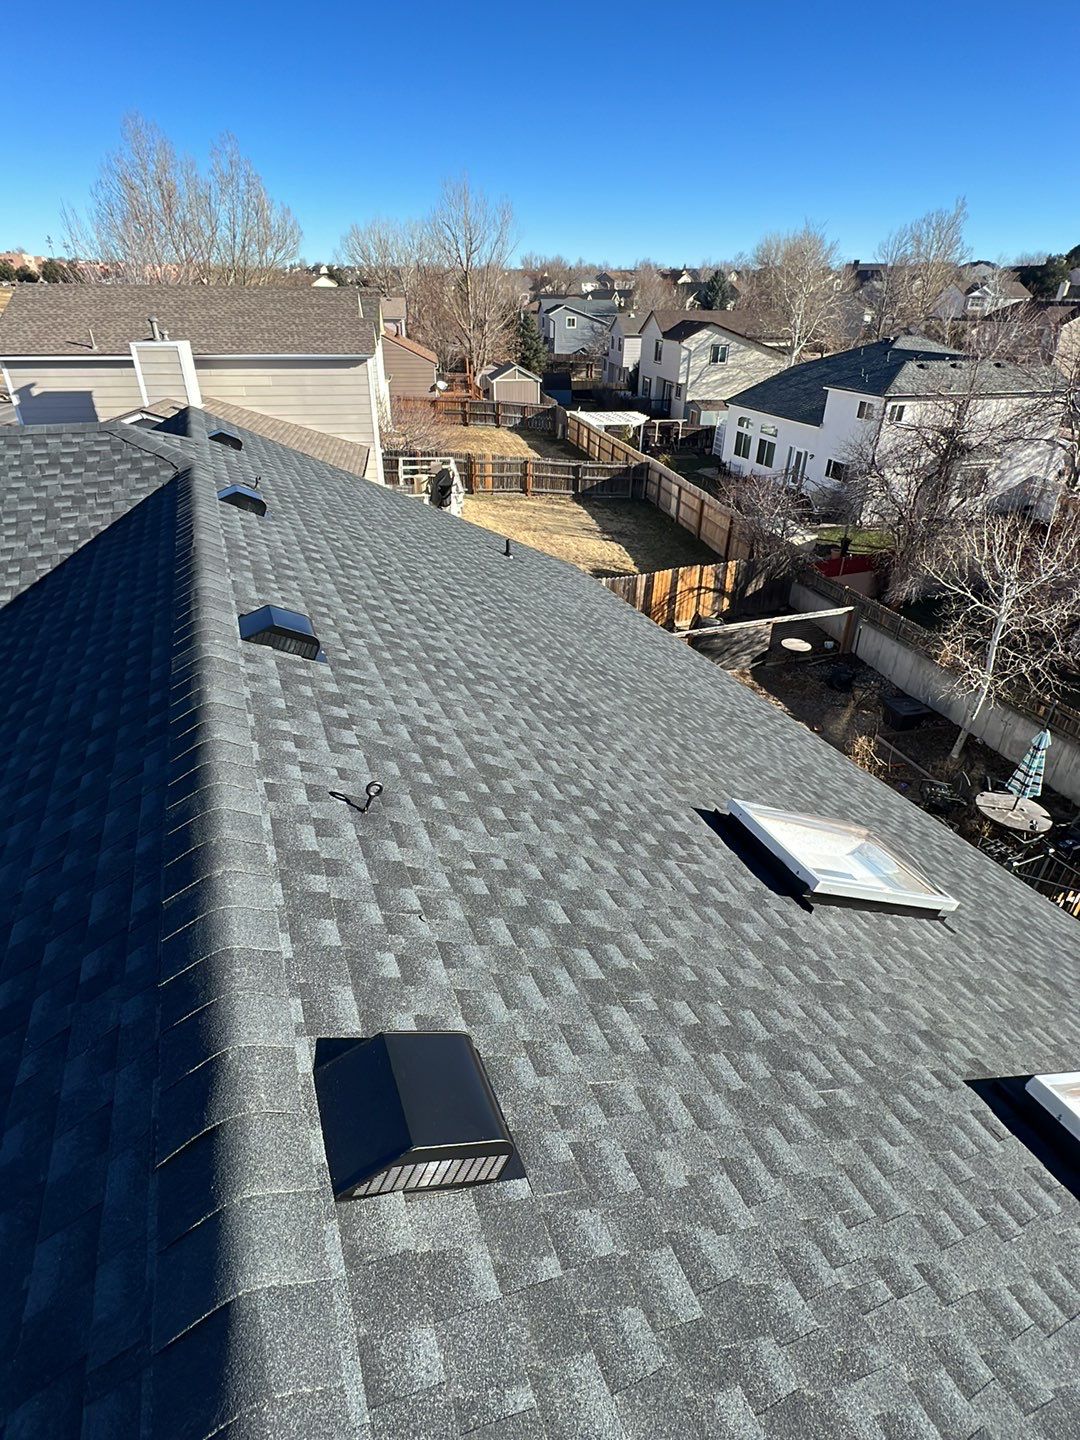 Roofing services Denver roofing contractors